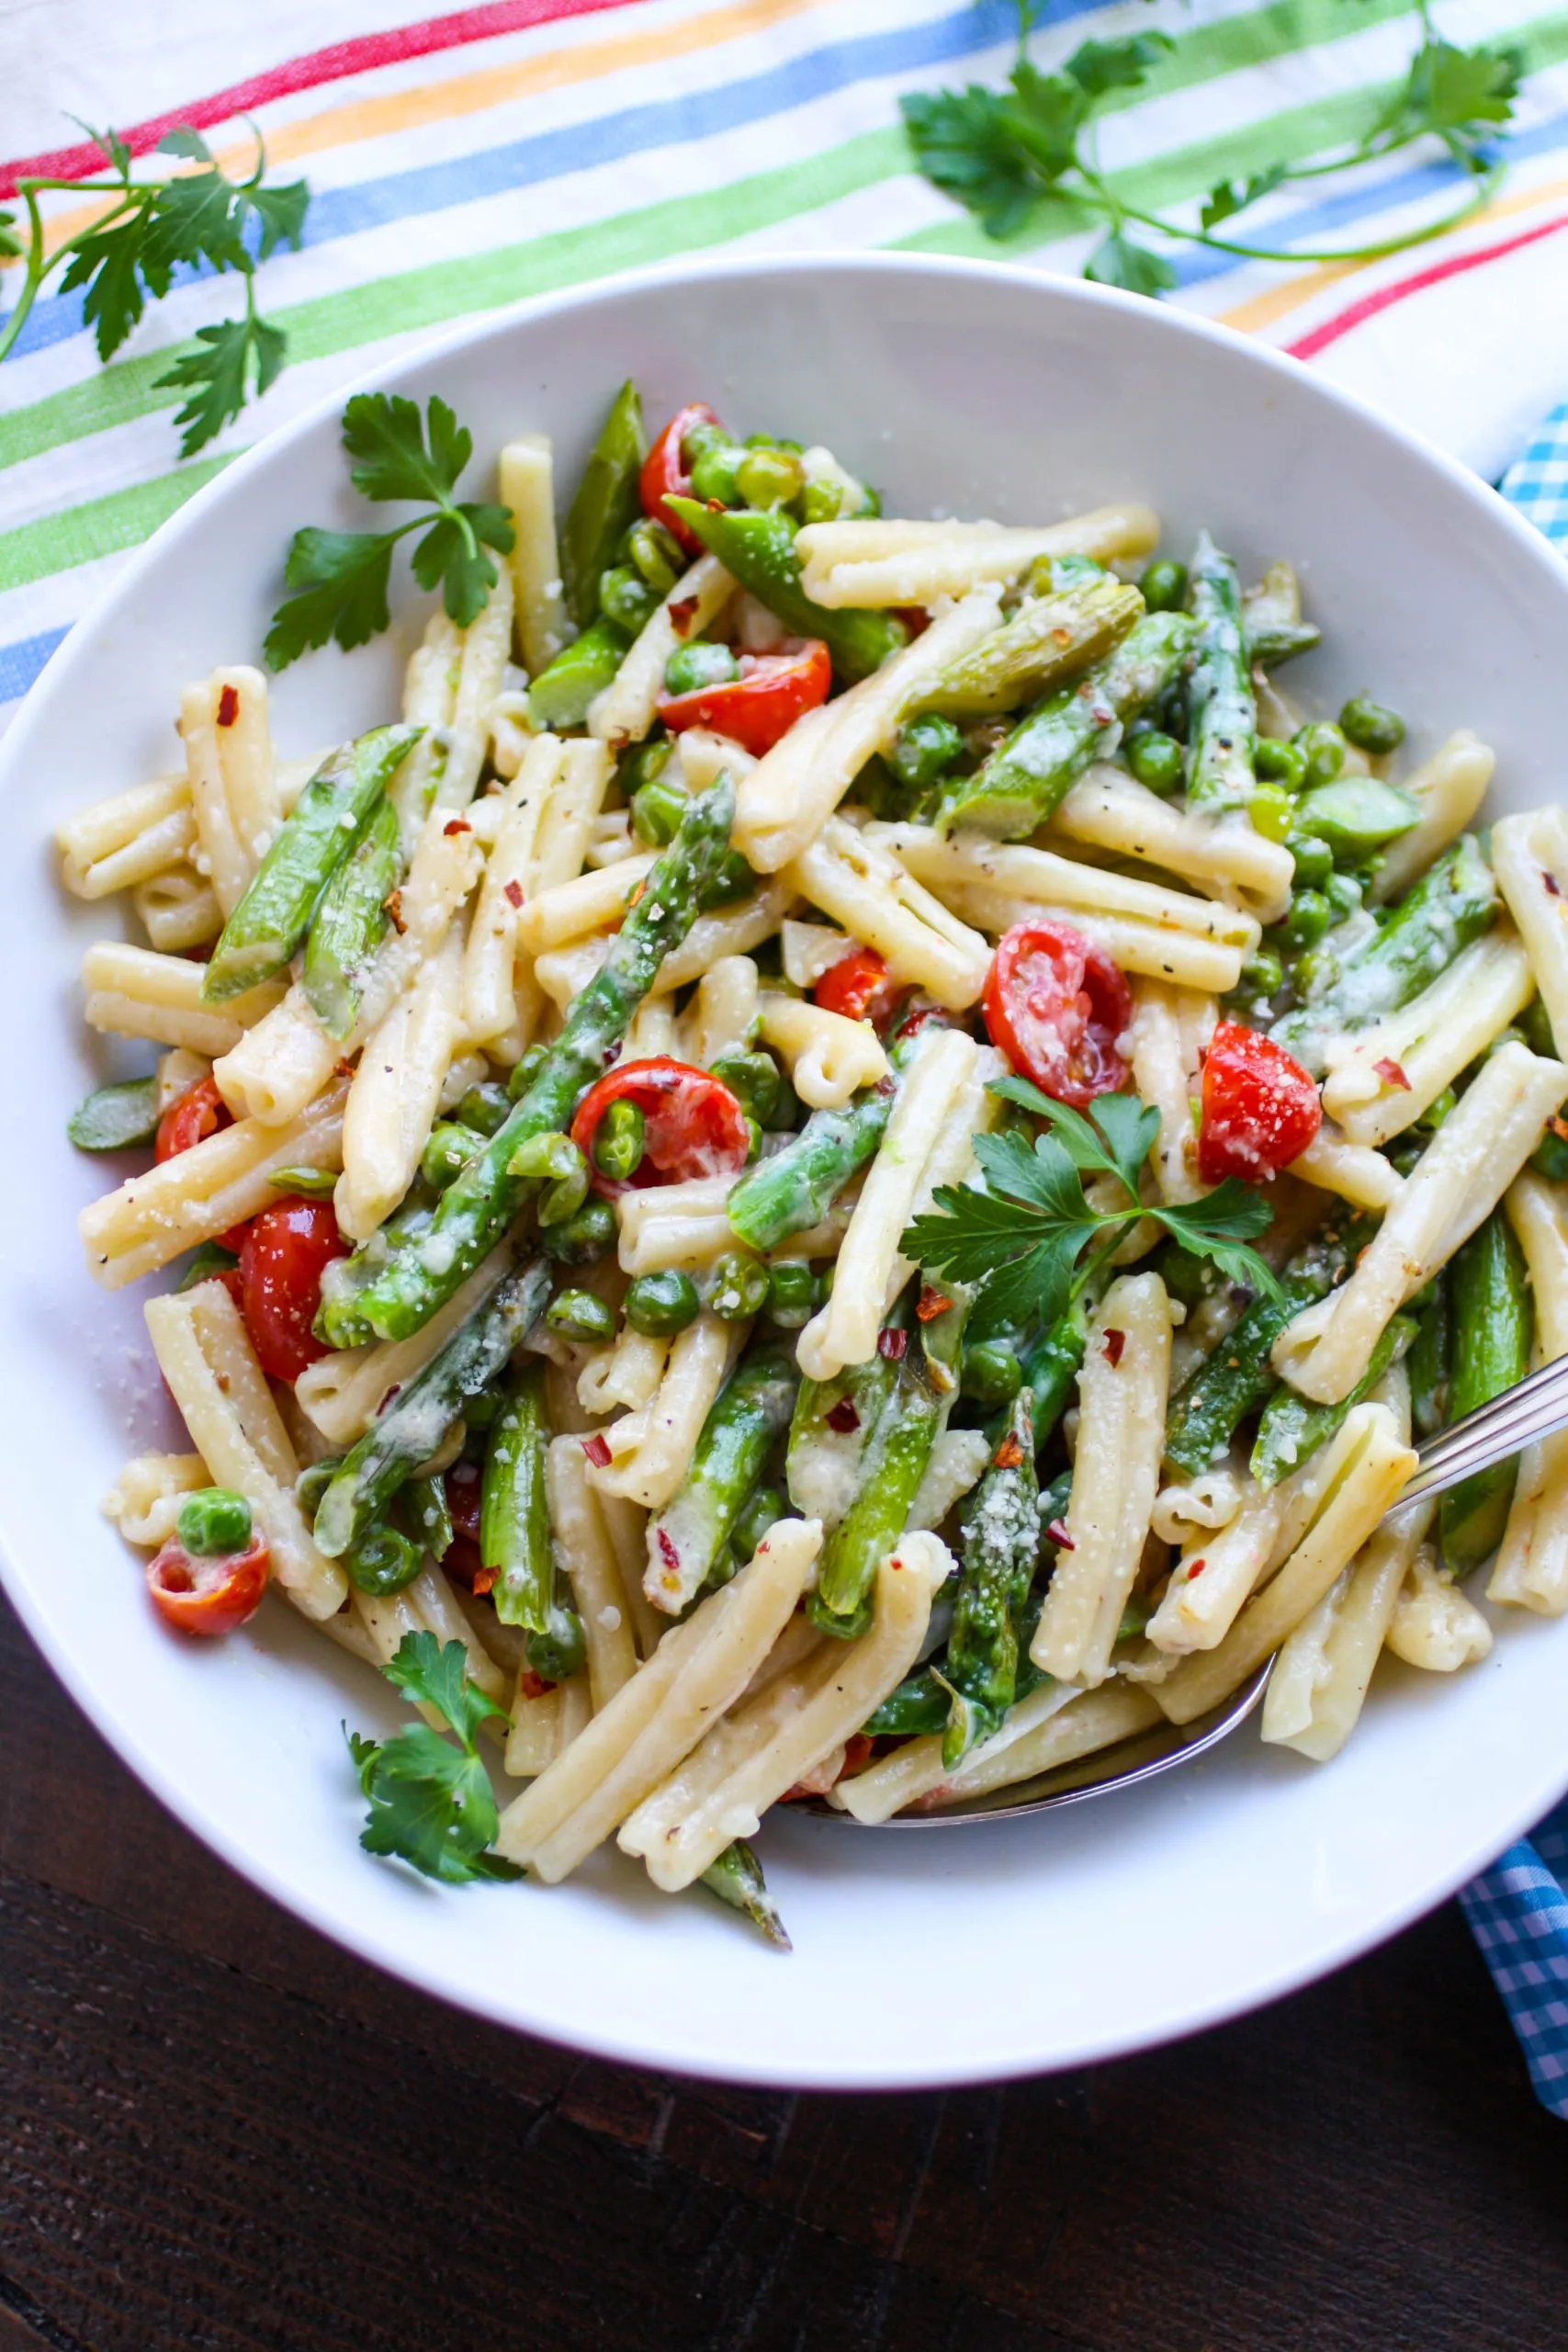 Pasta Primavera in Light Cream Sauce is a lovely dish with great veggies included! Pasta Primavera in Light Cream Sauce makes a lovely meal.